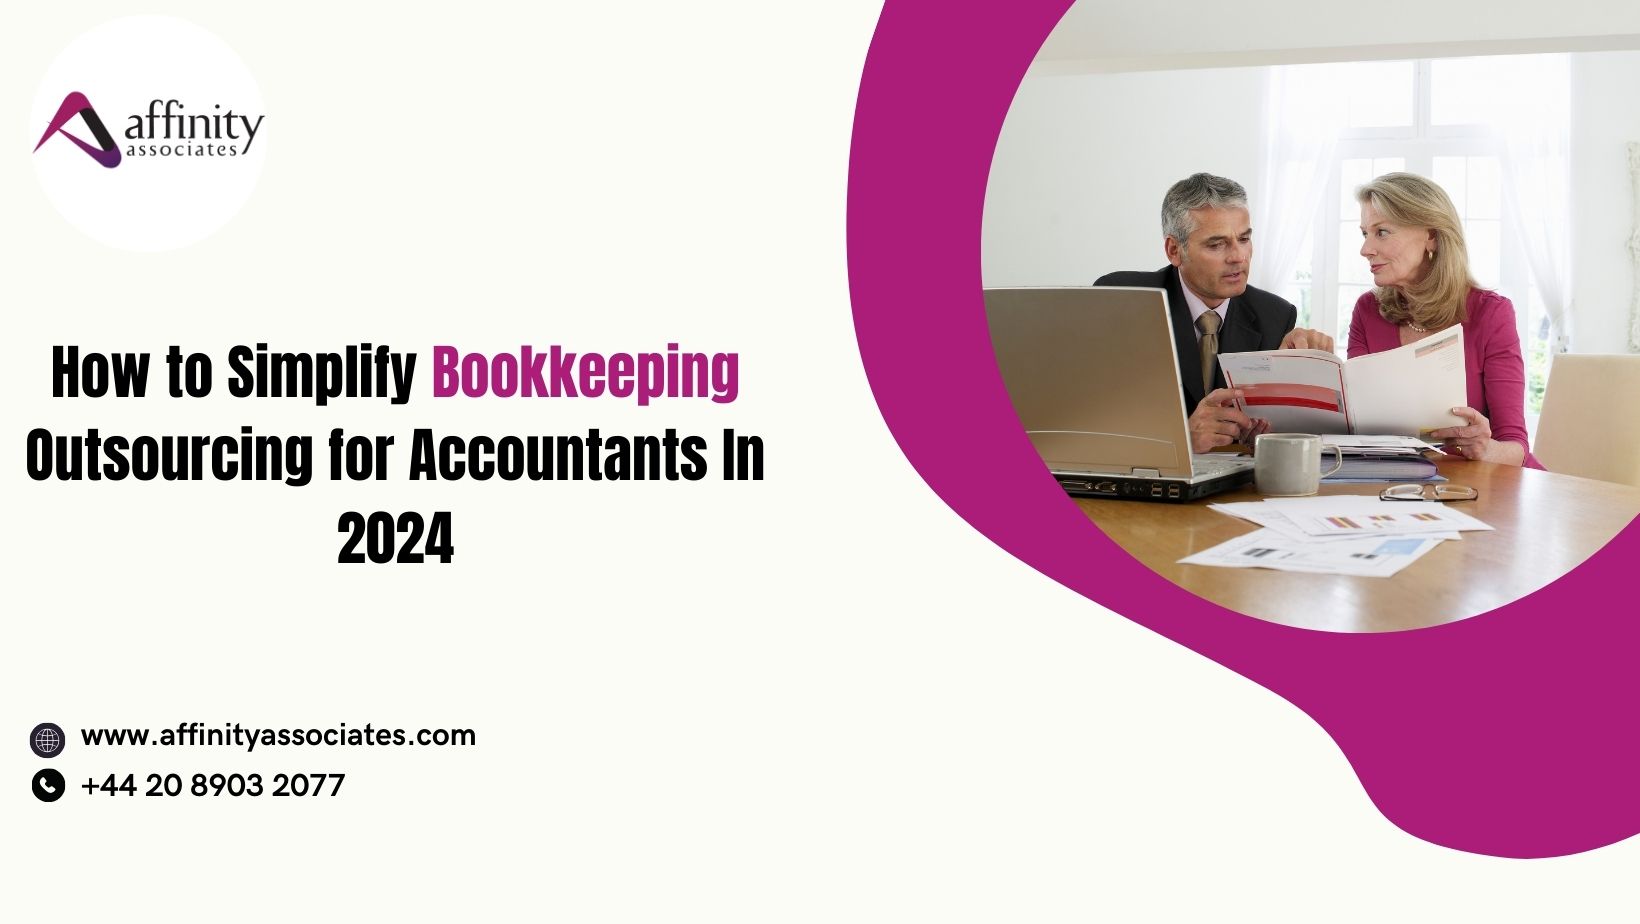 How to Simplify Bookkeeping Outsourcing for Accountants In 2024